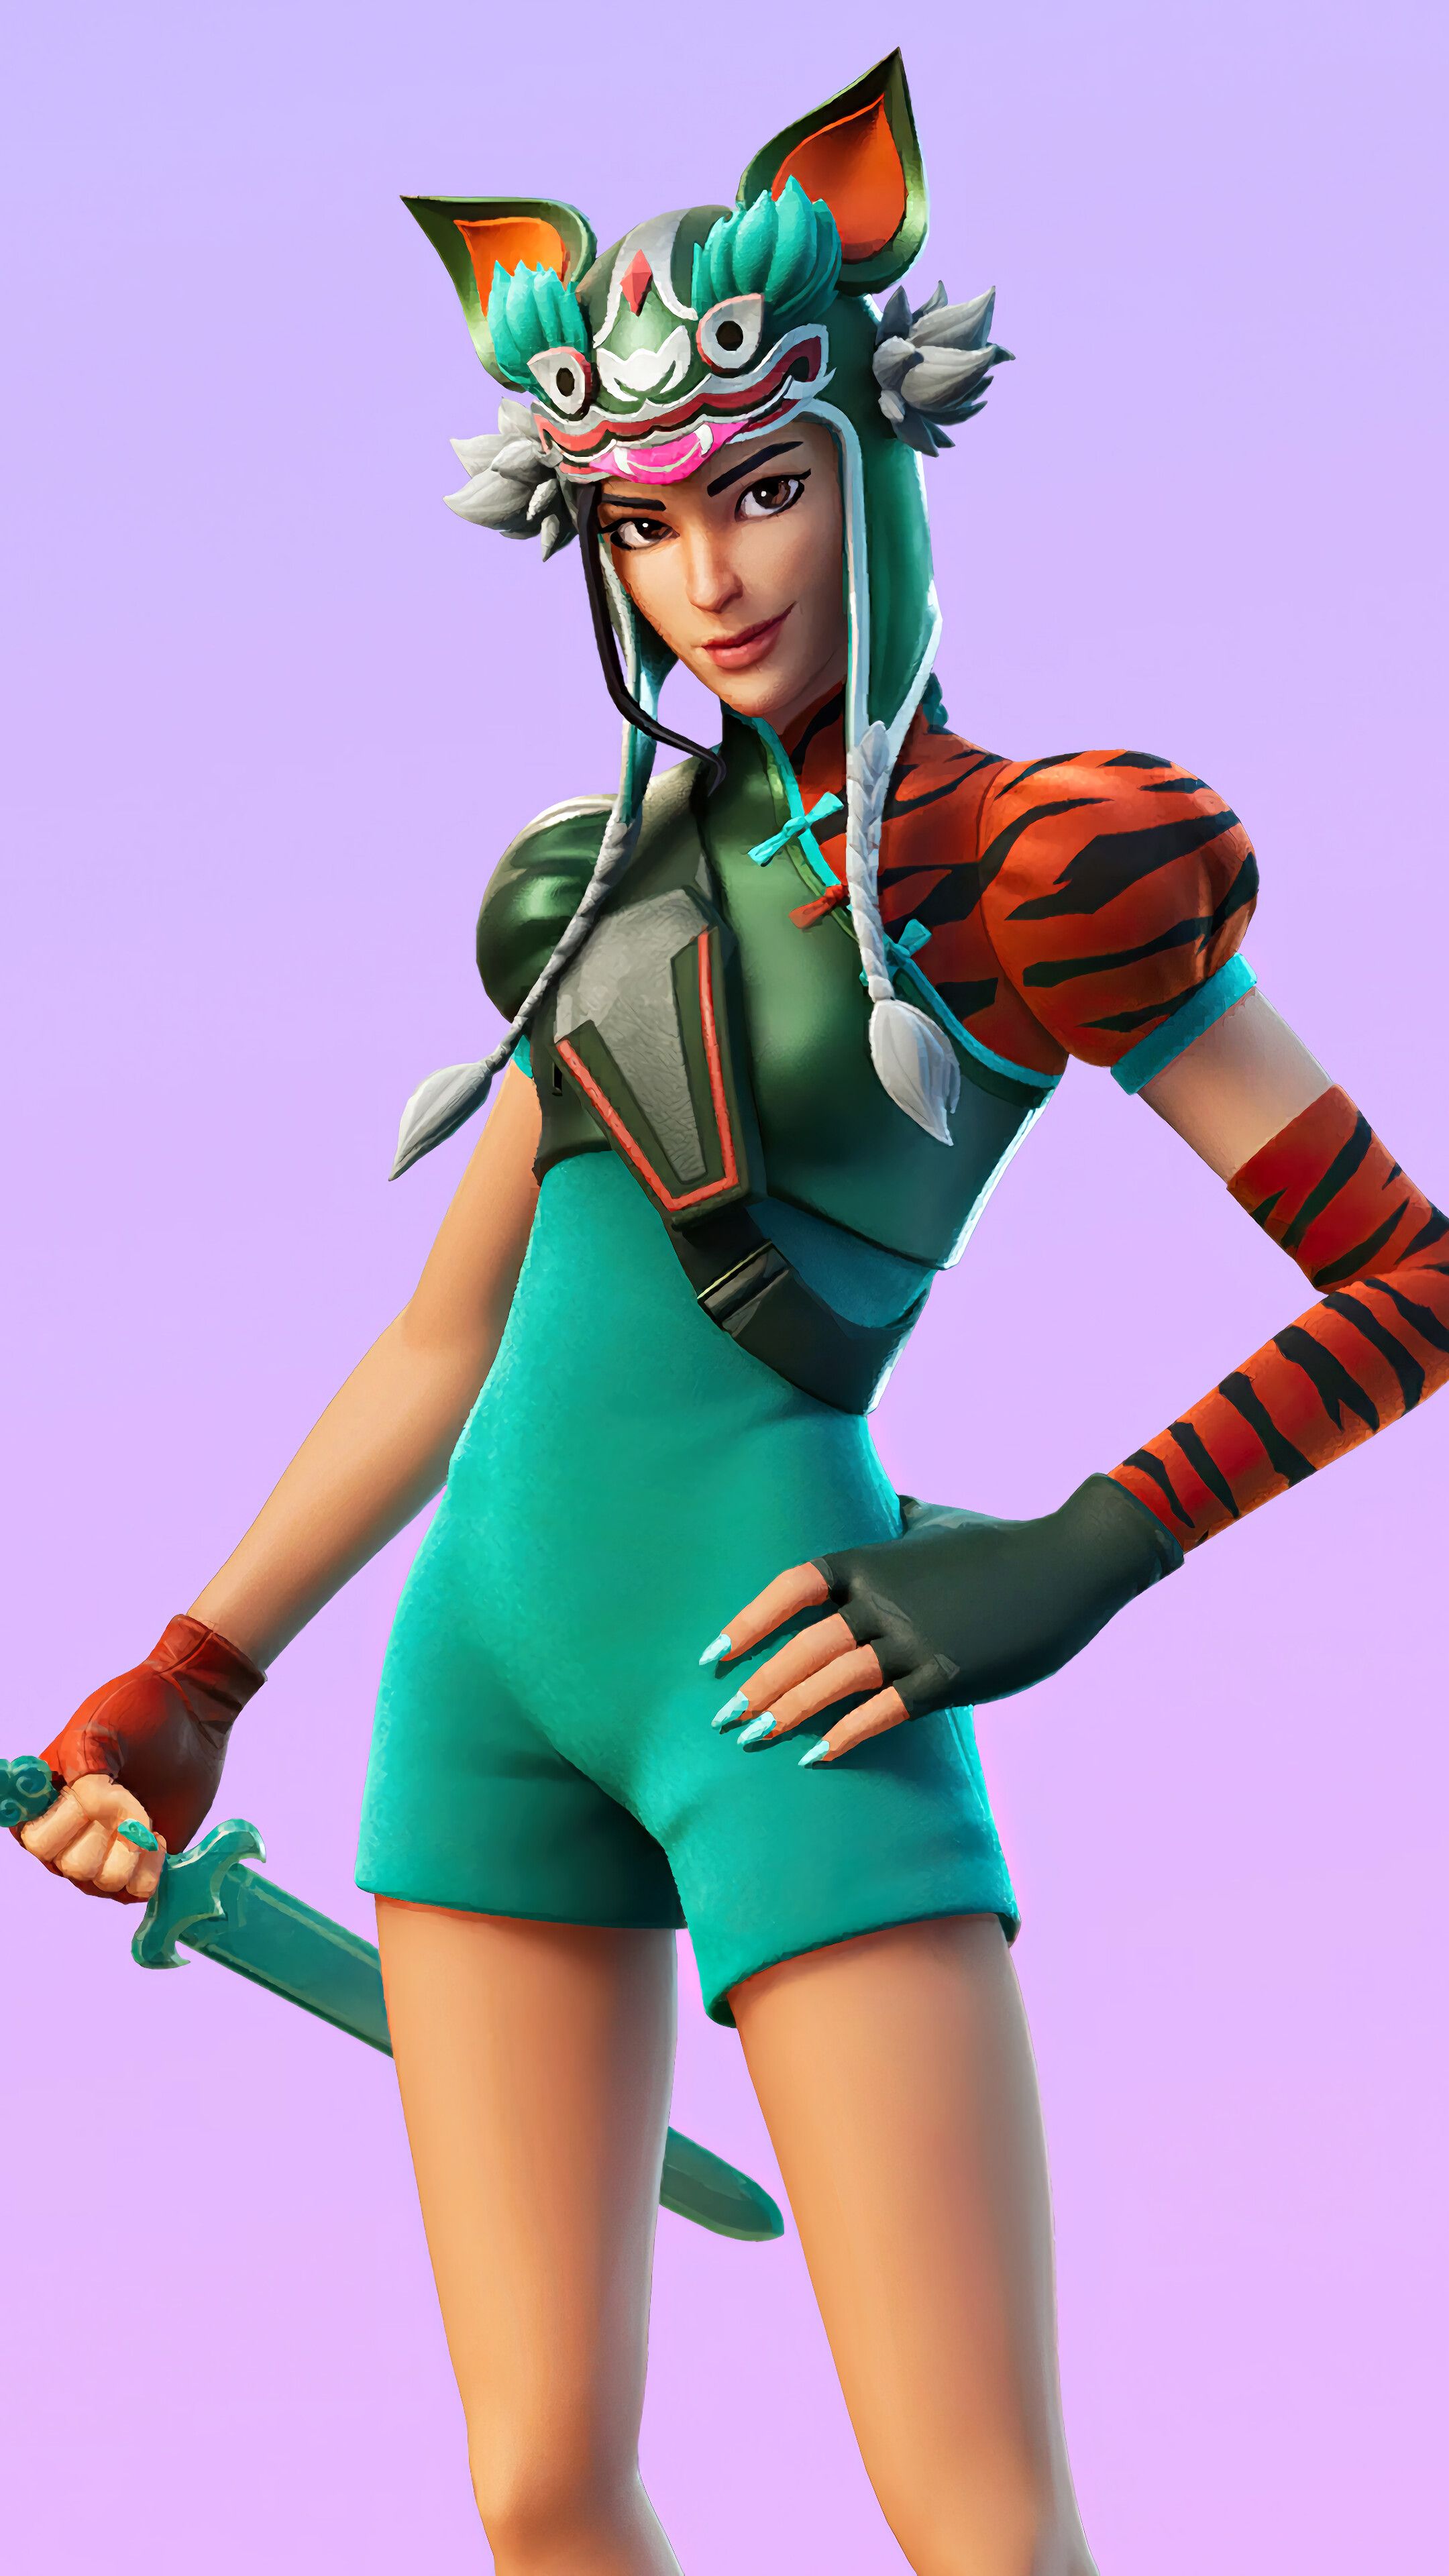 Tigeress, Fortnite, Lunar New Year, Skin, Outfit, 4K phone HD Wallpaper, Image, Background, Photo and Picture